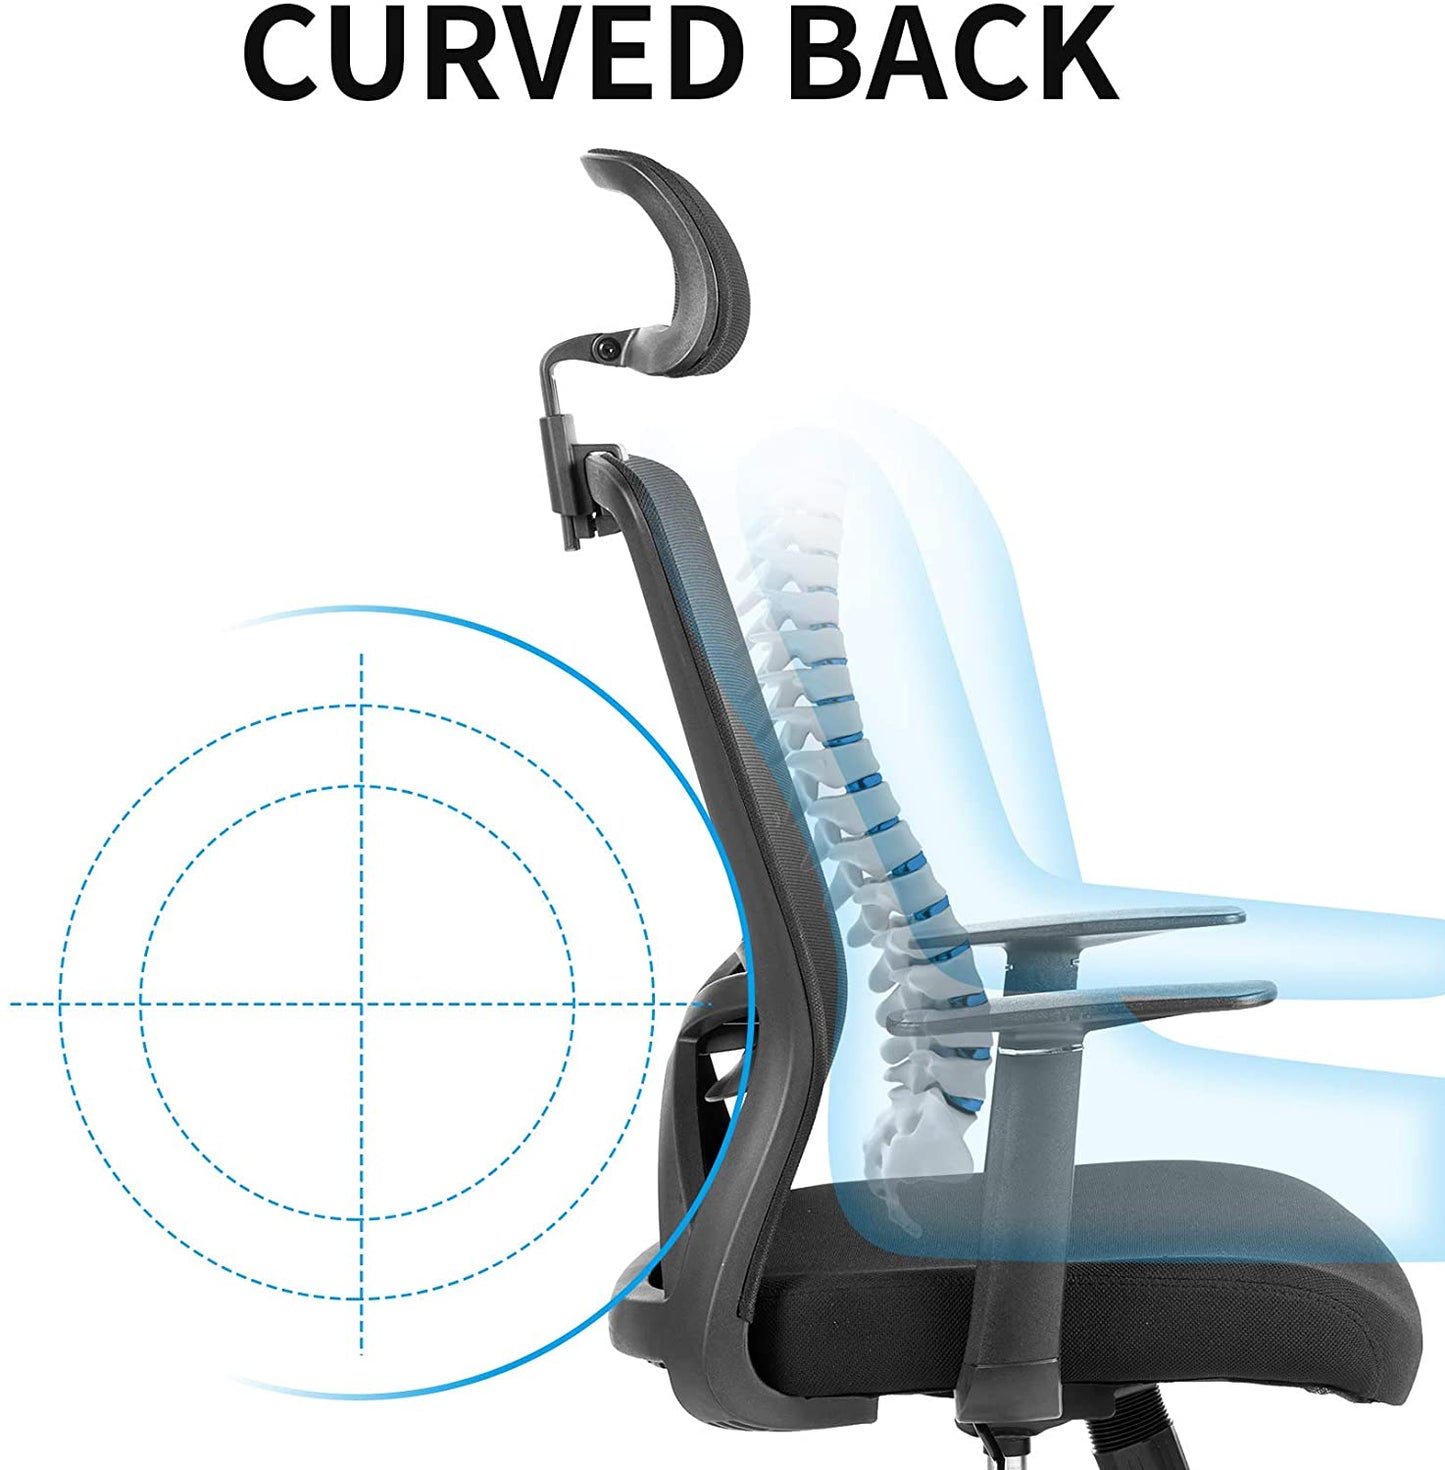 UNICOO - Home Office Chair Ergonomic Desk Chair High-Back Mesh Computer Chair Lumbar Support Comfortable Executive Adjustable Rolling Swivel Task Chair with Armrests (W-215C - Black)